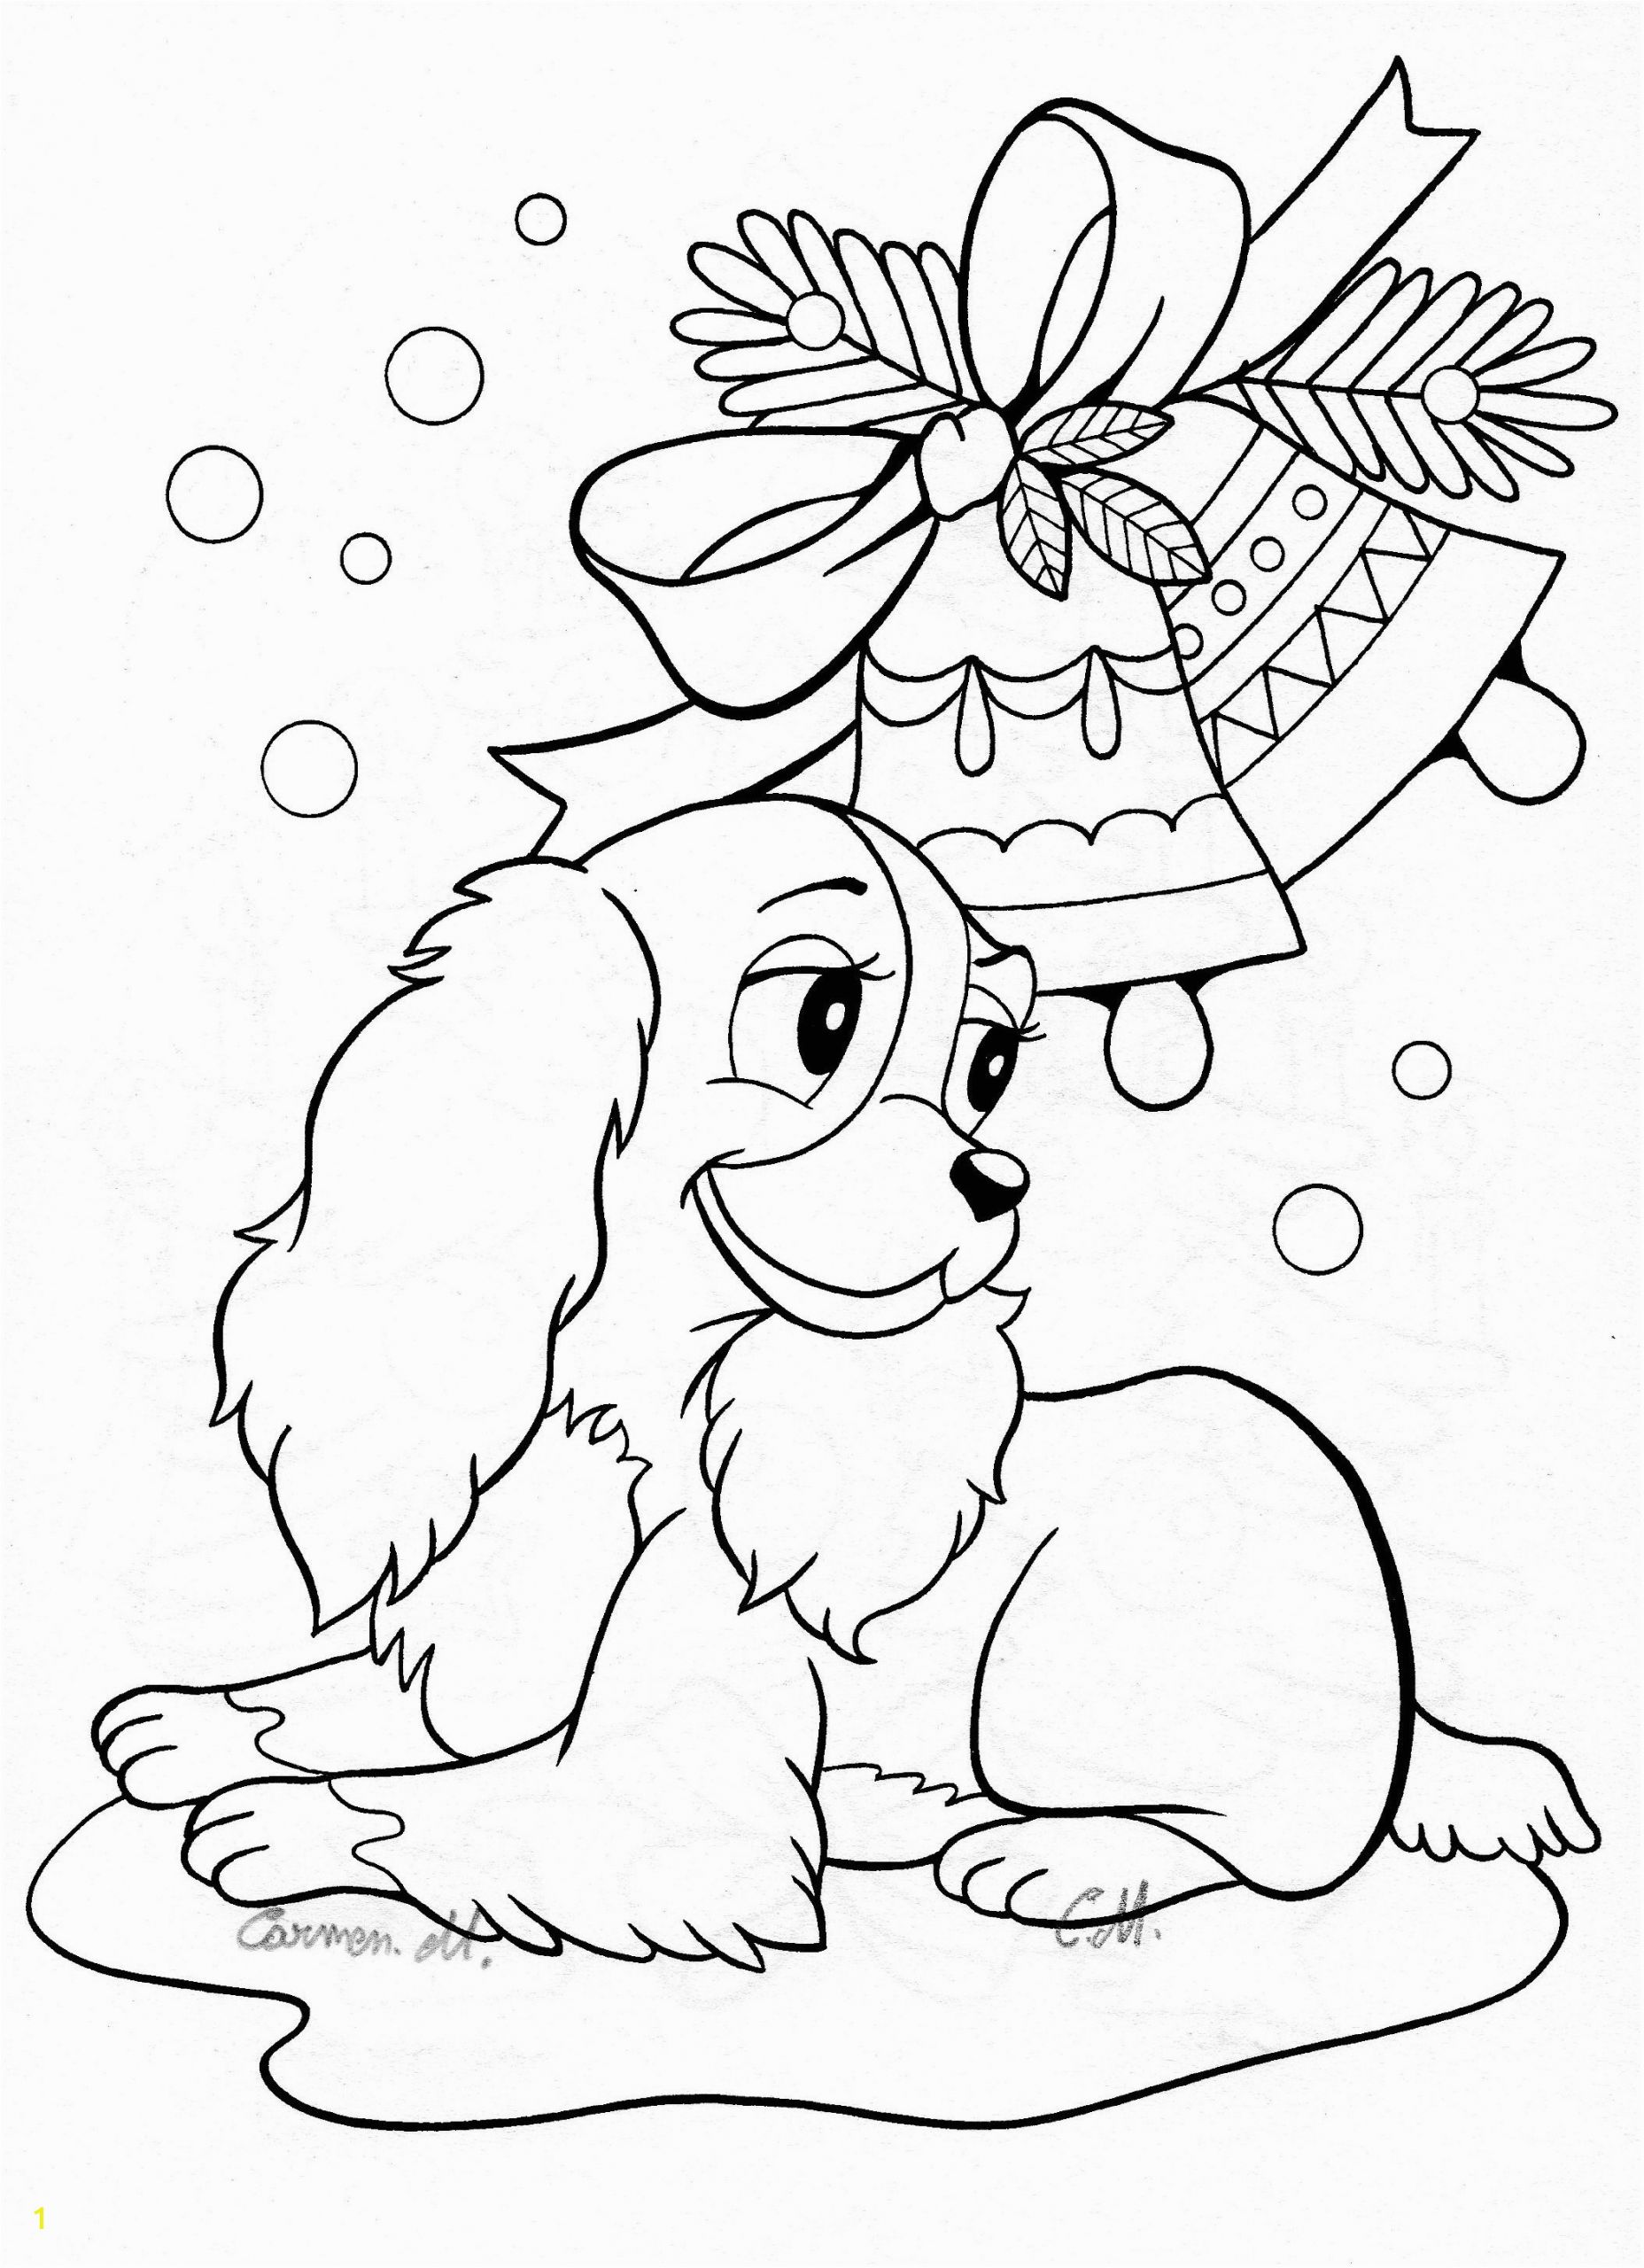 Free Coloring Pages for Kids Dogs Best Coloring Christmas Pet Pages Fresh Printable Od Dog